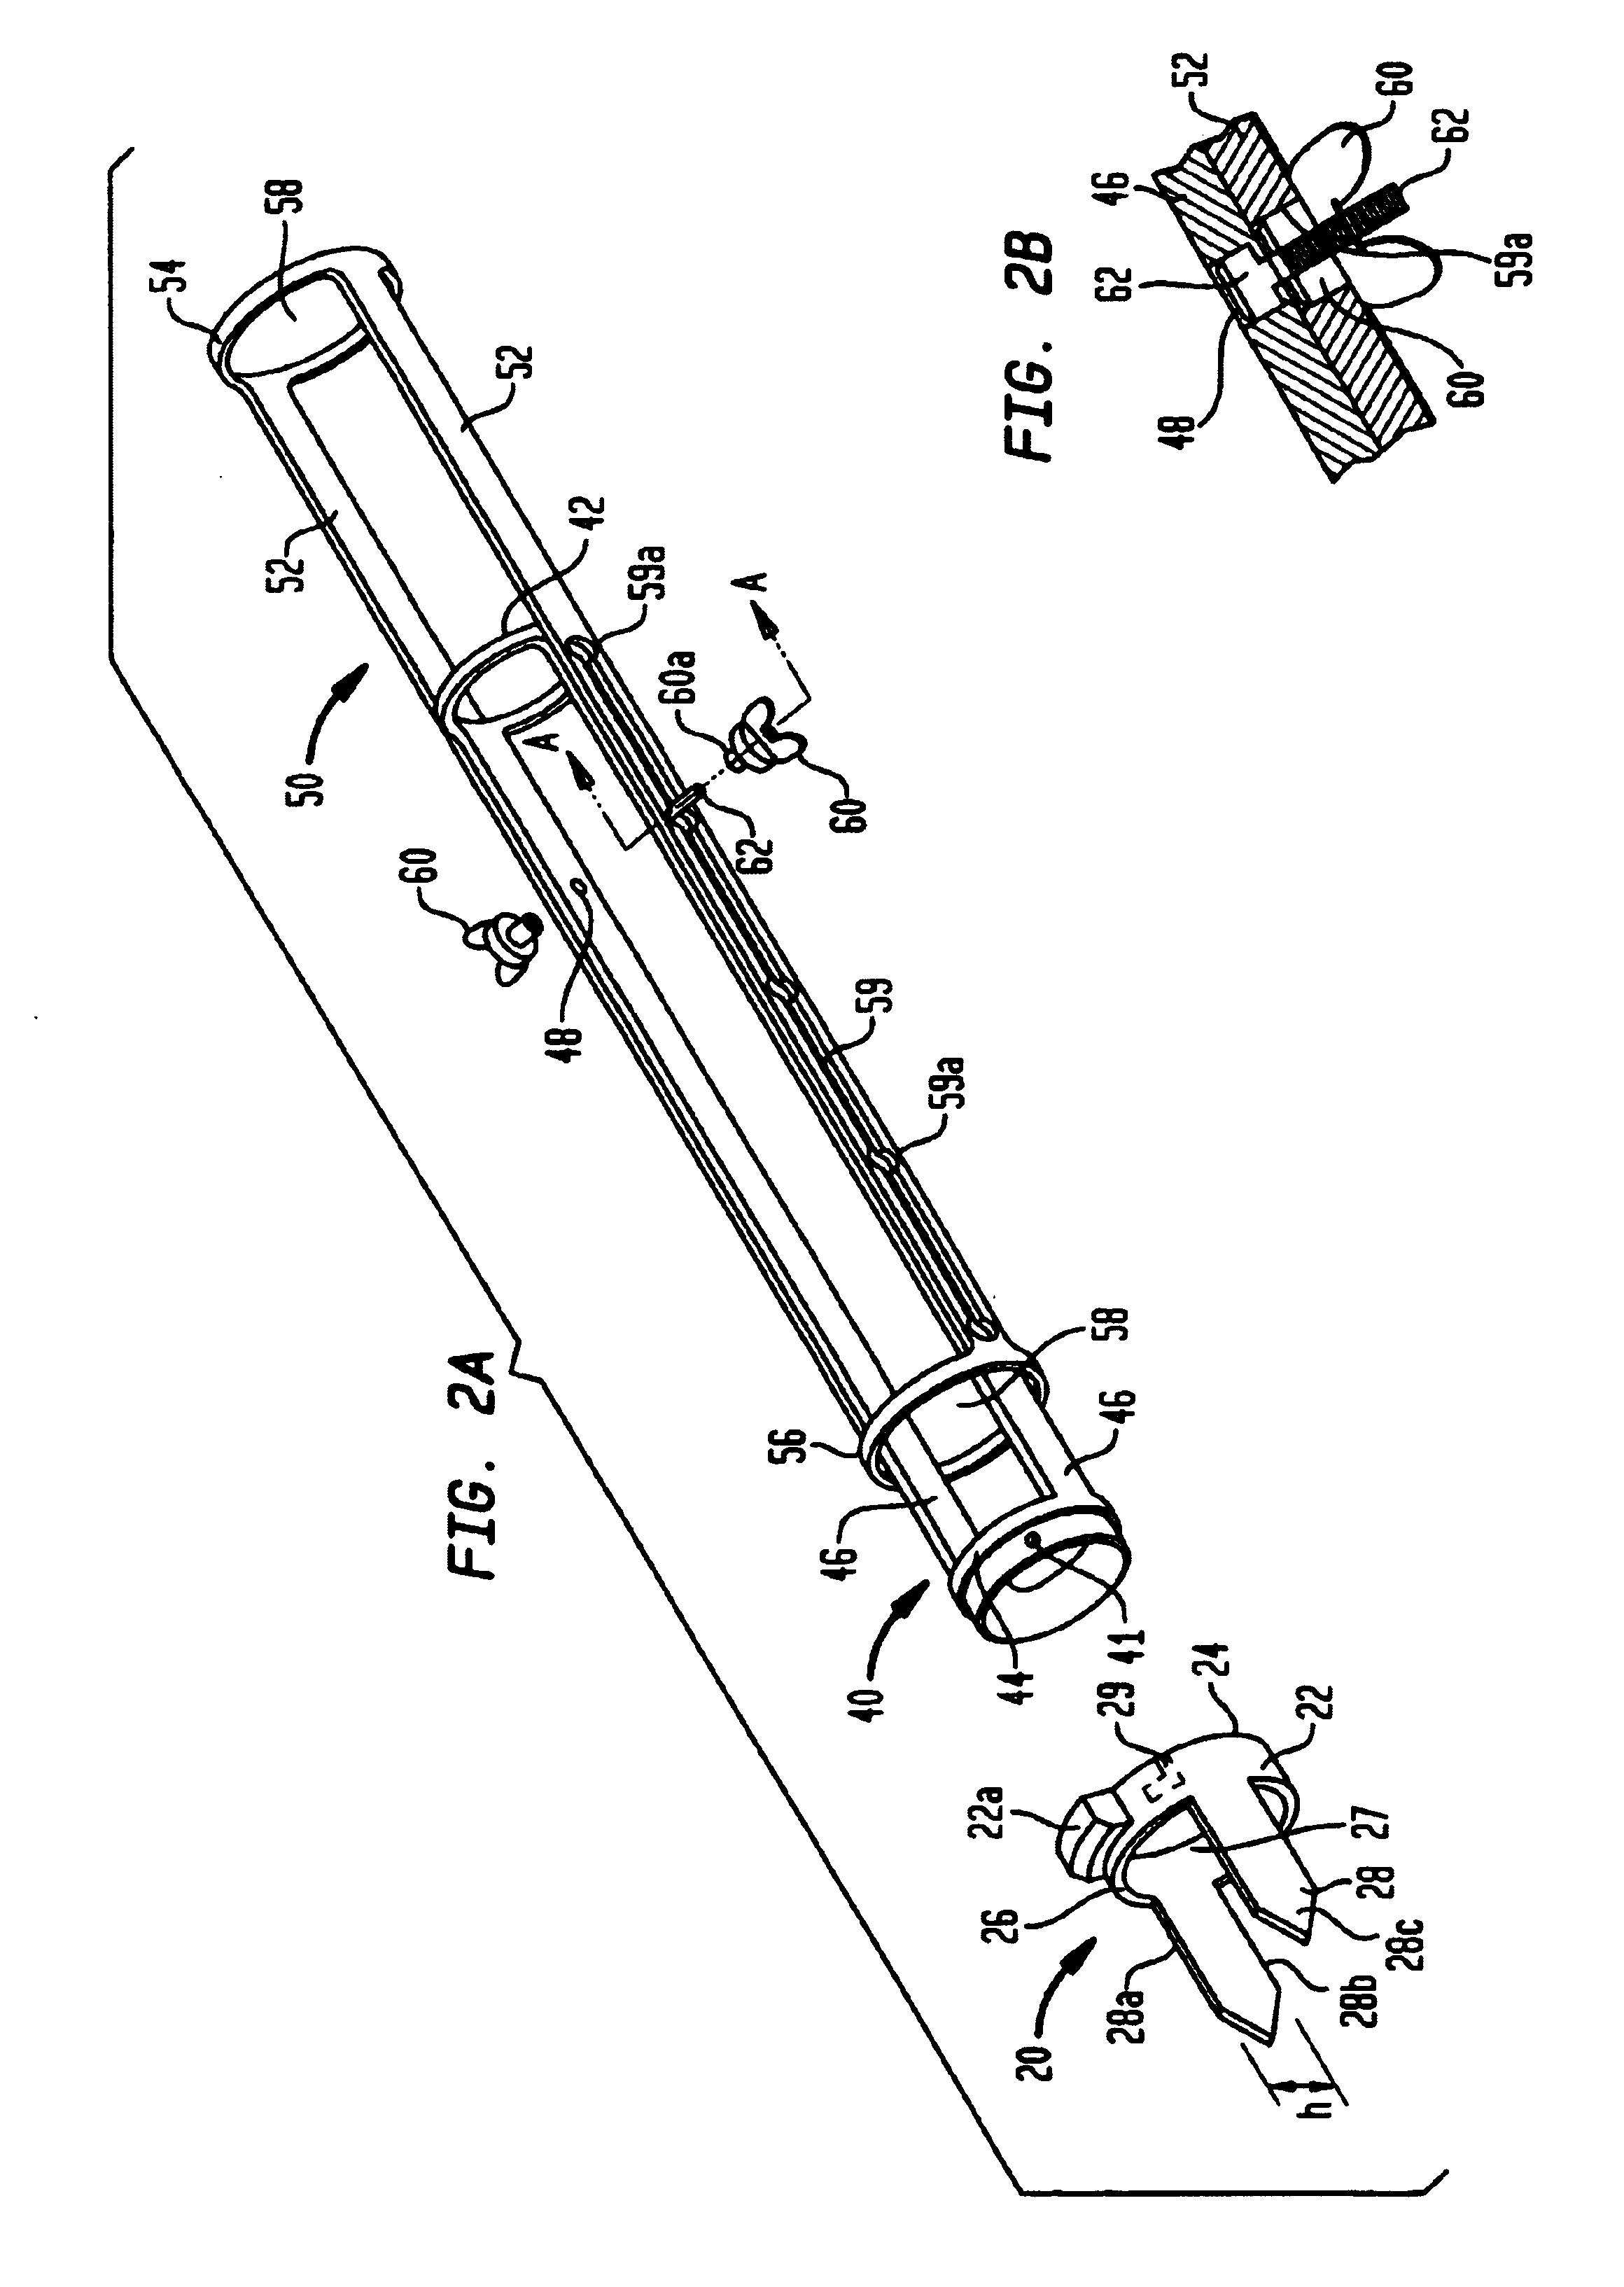 Instrumentation and method for implant insertion